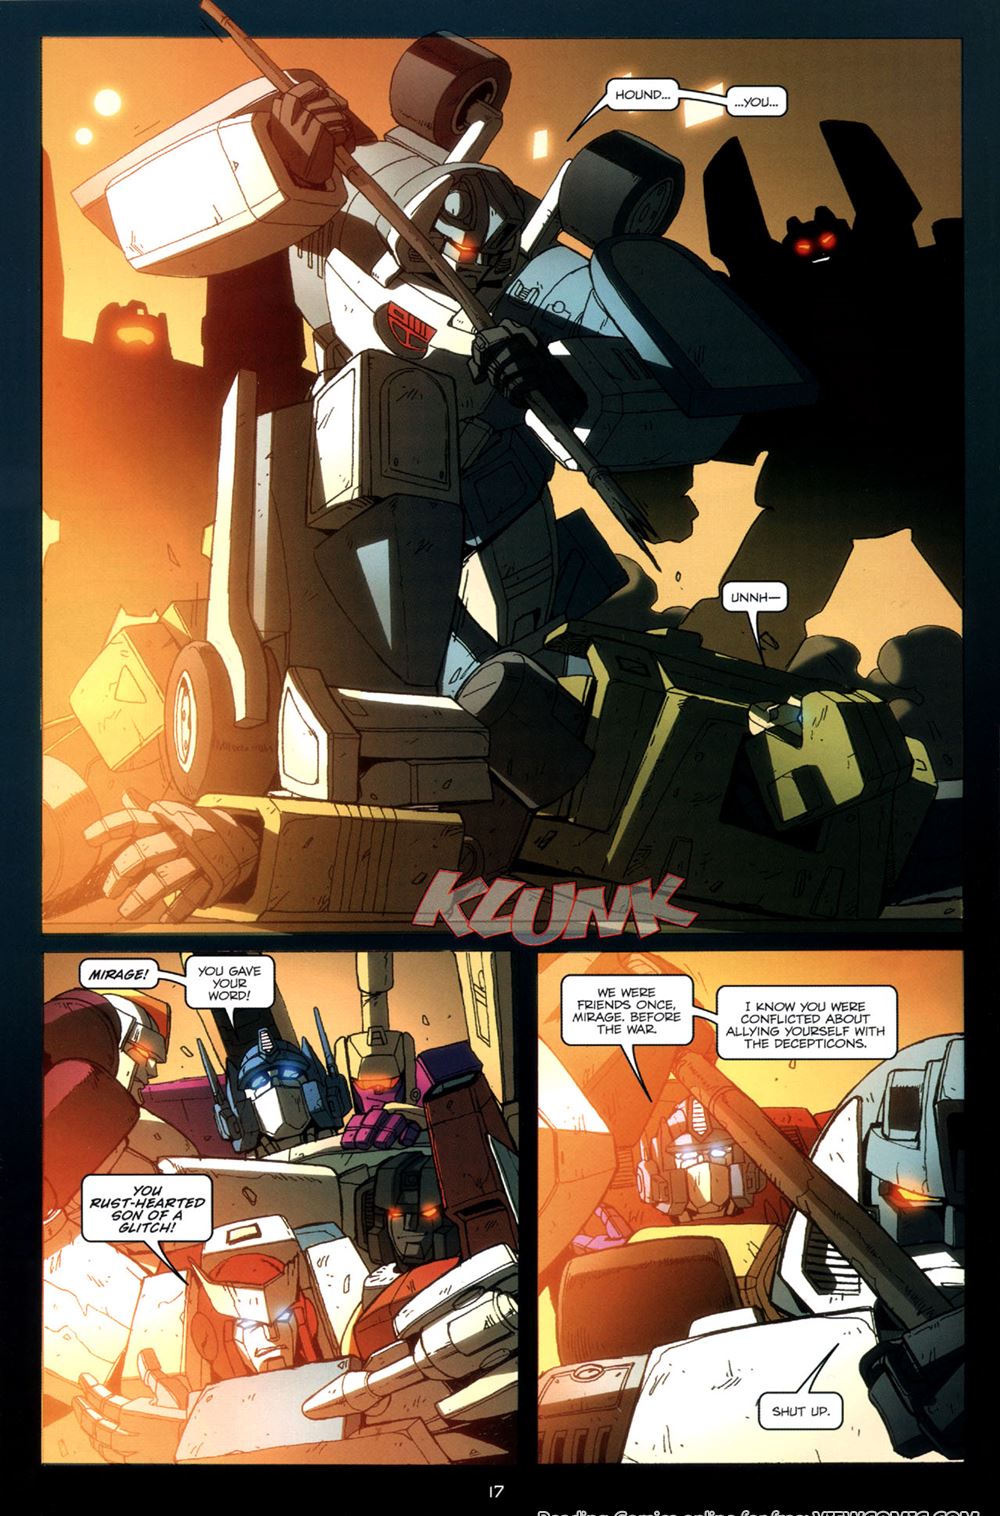 Transformers Mirage Porn - Transformers Spotlight Mirage 2008 | Read Transformers Spotlight Mirage  2008 comic online in high quality. Read Full Comic online for free - Read  comics online in high quality .|viewcomiconline.com